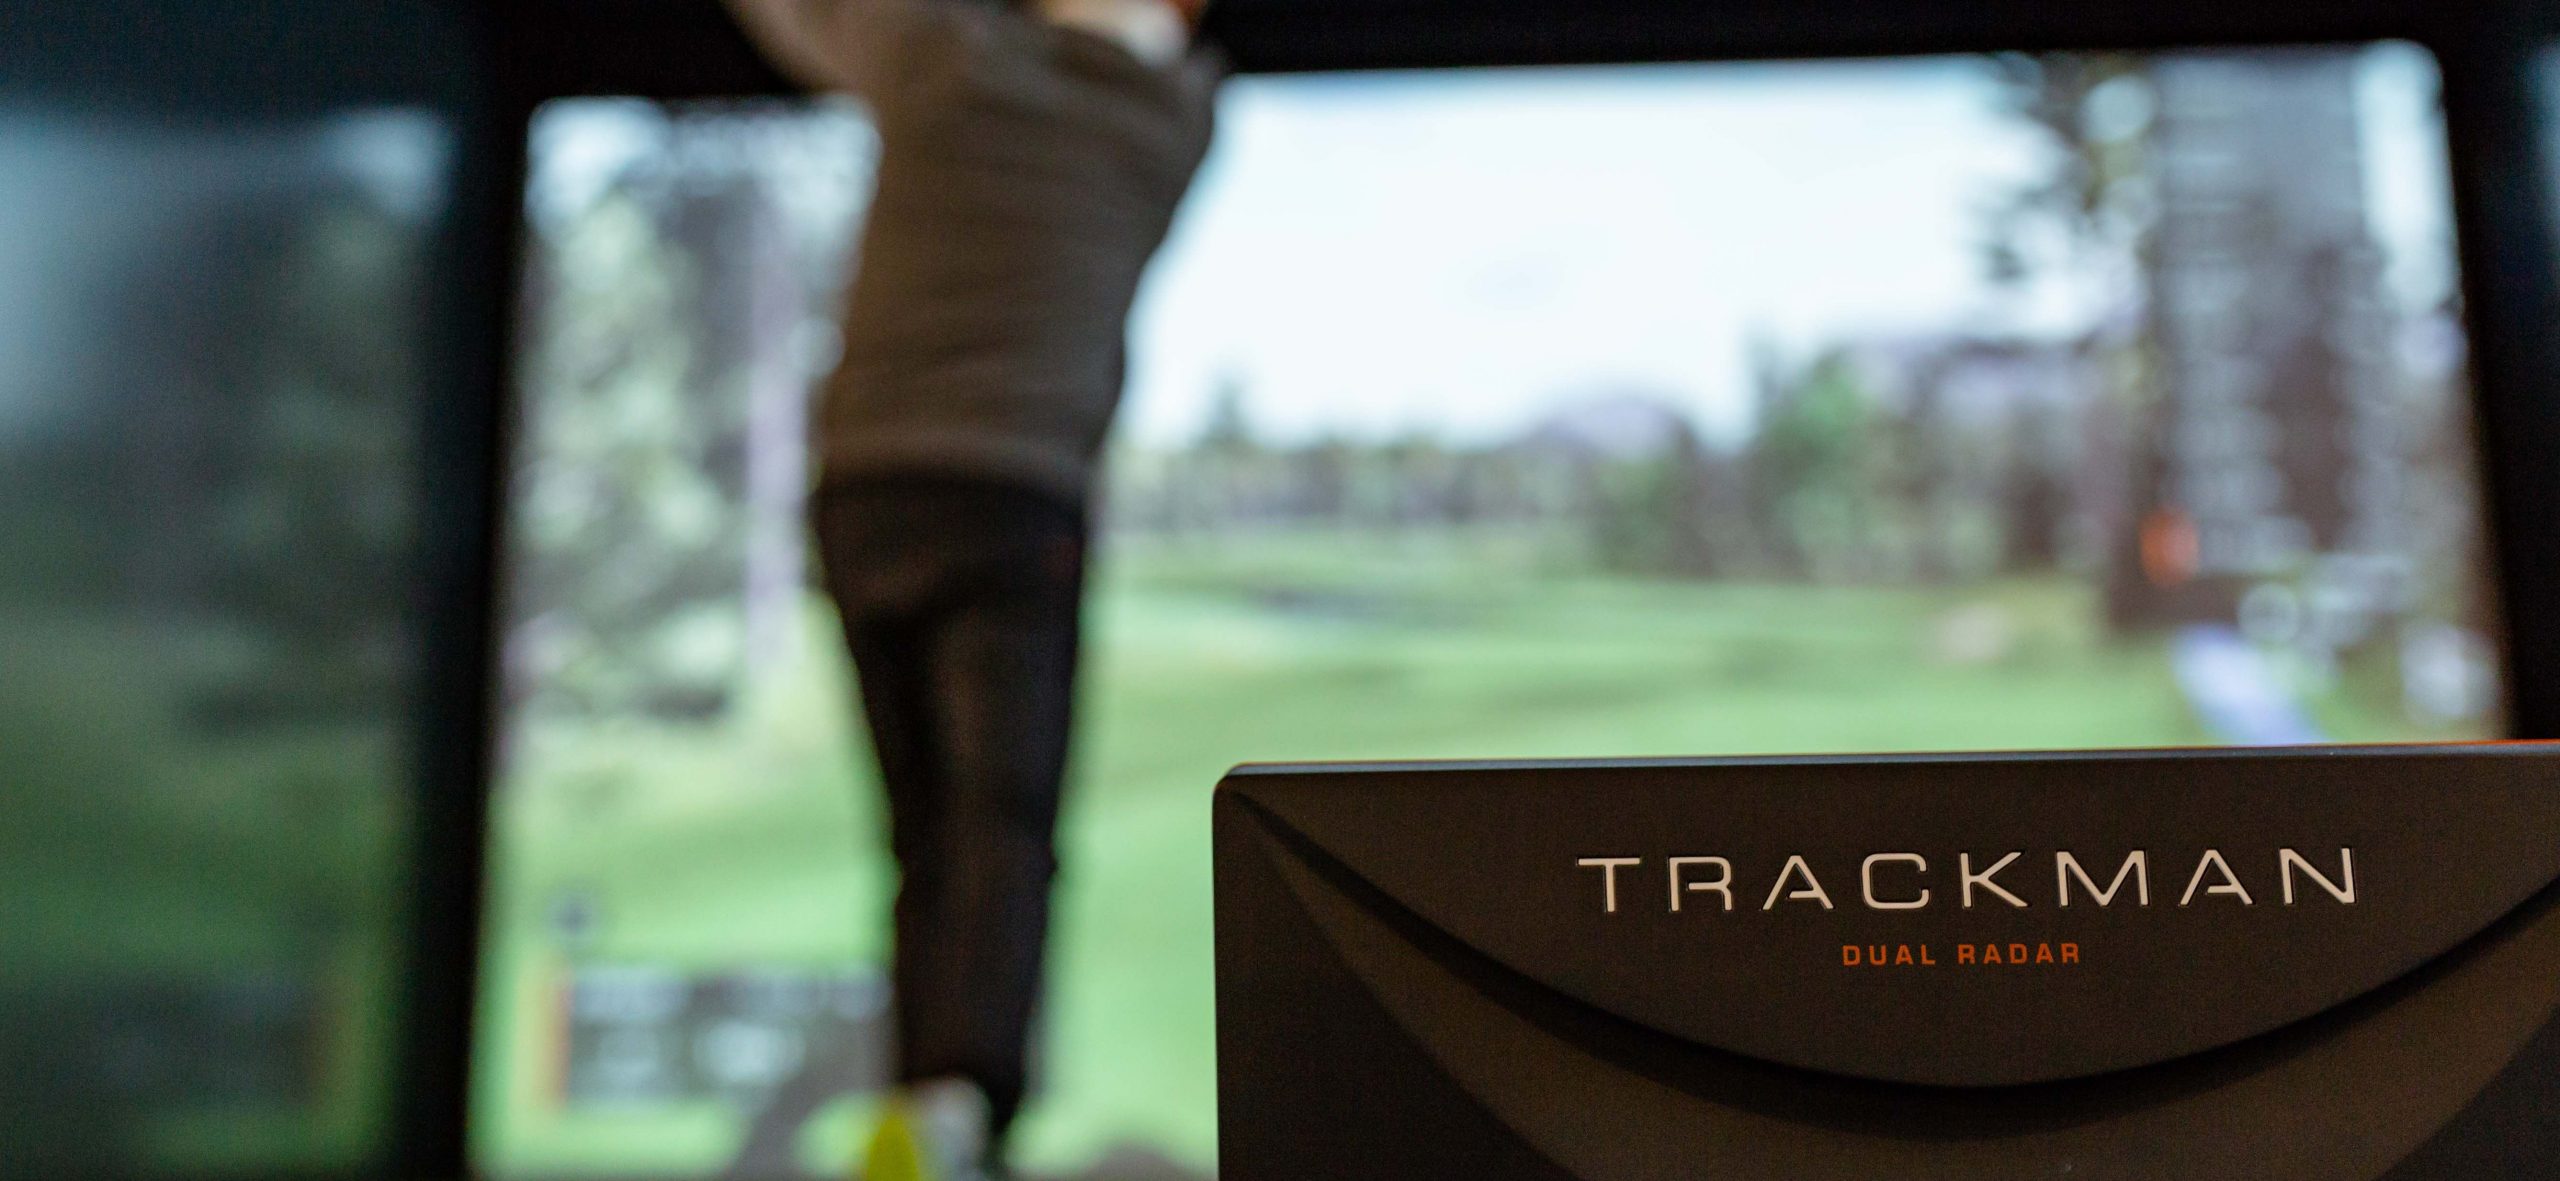 Rear view of a man swinging the golf club next to the Trackman dual radar